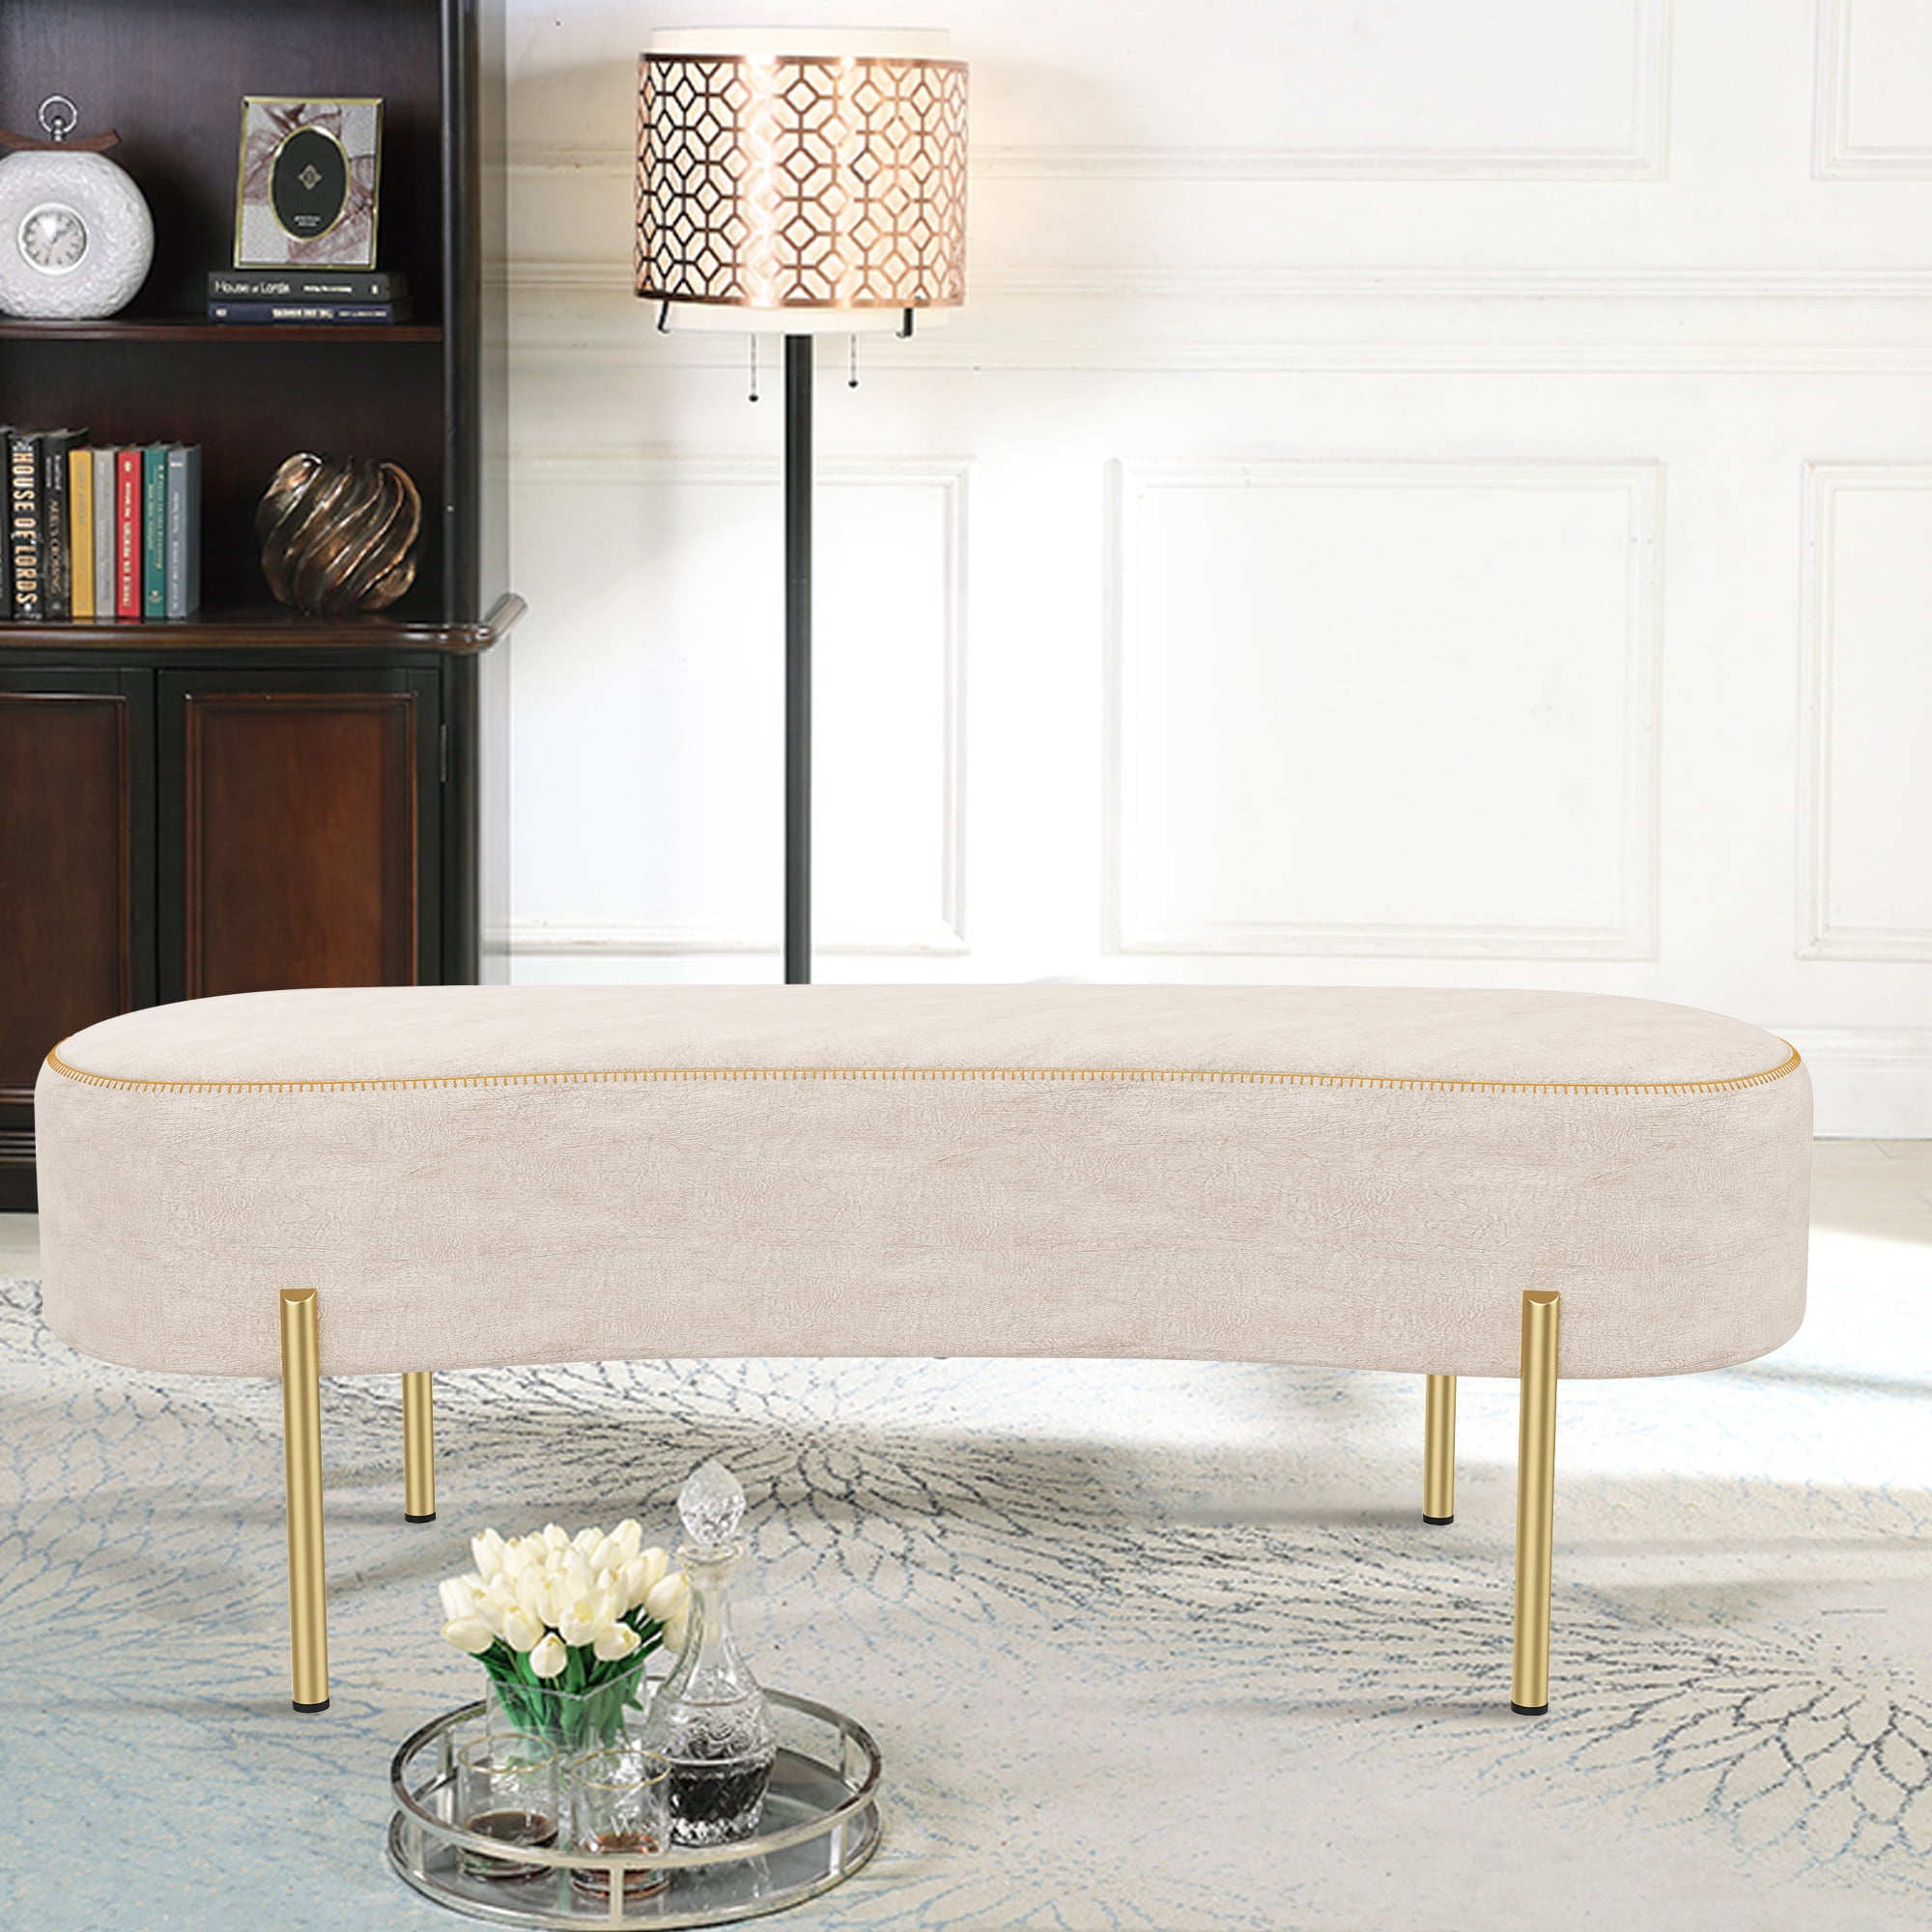 Andeworld Upholstered Ottoman Bench Seat with Gold Legs,Sitting Bench  Living Room Bench for Bedroom Indoor Benches(Beige)